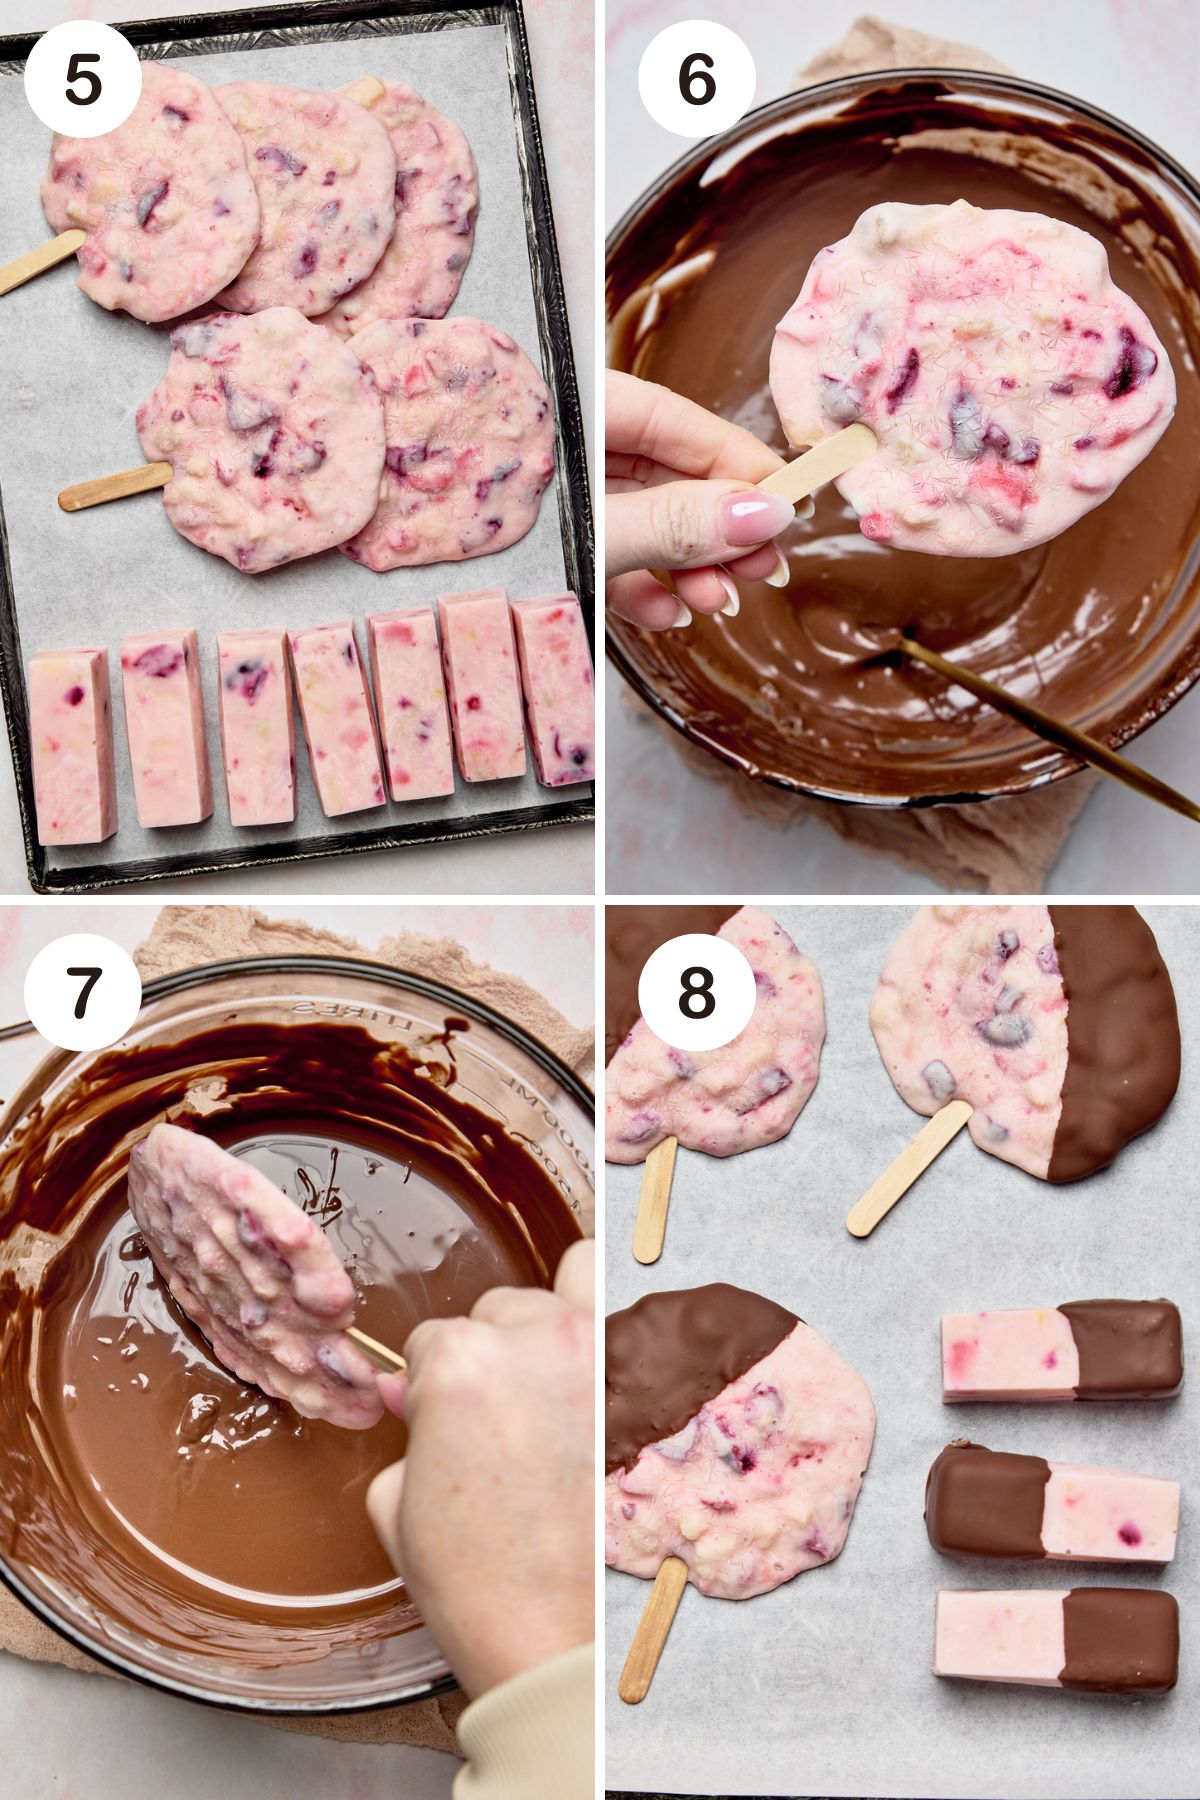 numbered step by step photos showing how to dip the bars into melted chocolate